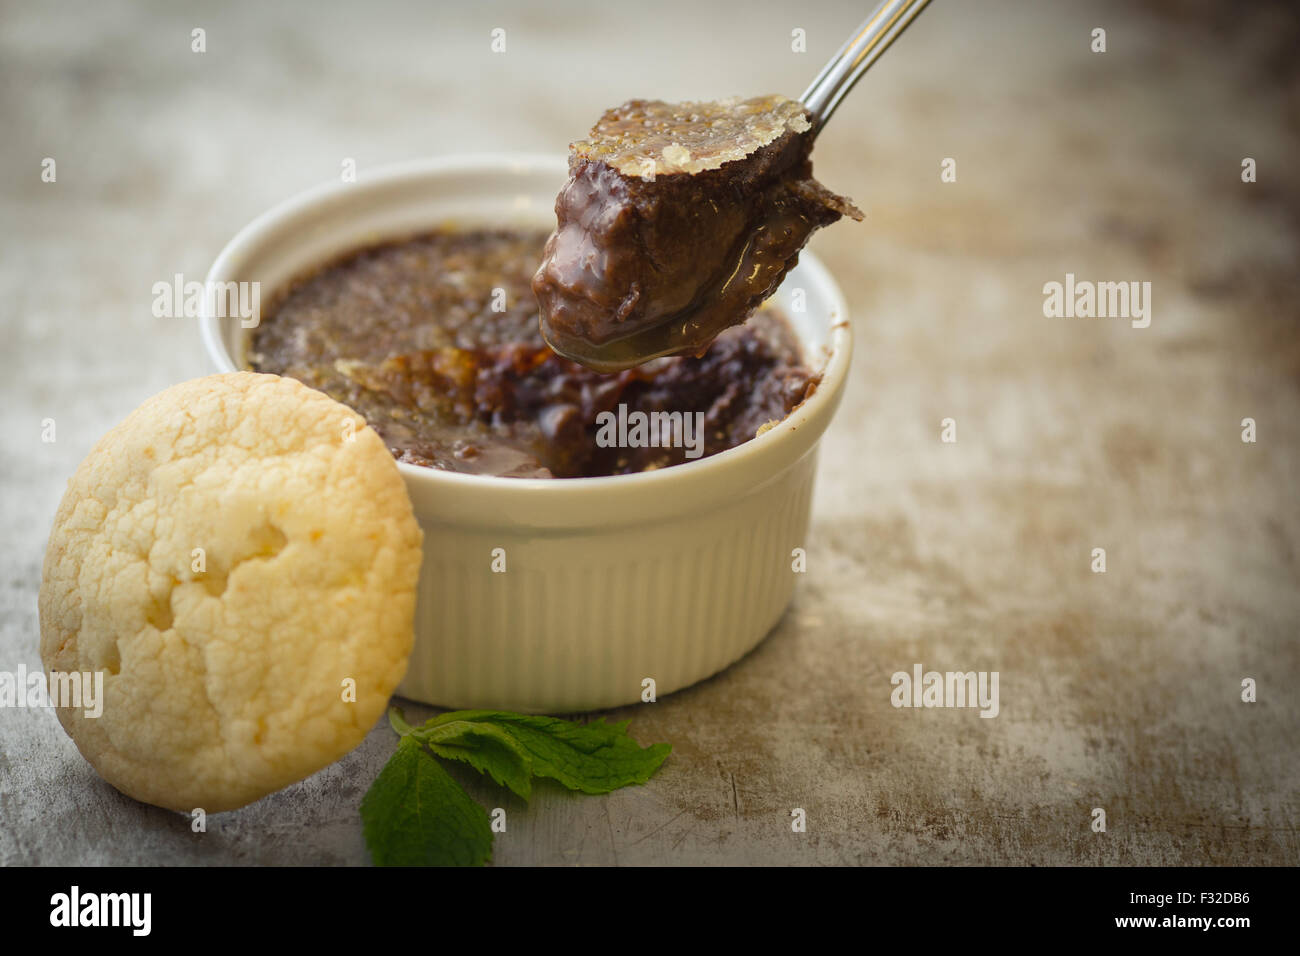 photography Pudding caramel - and creme Alamy stock hi-res 19 - images Page